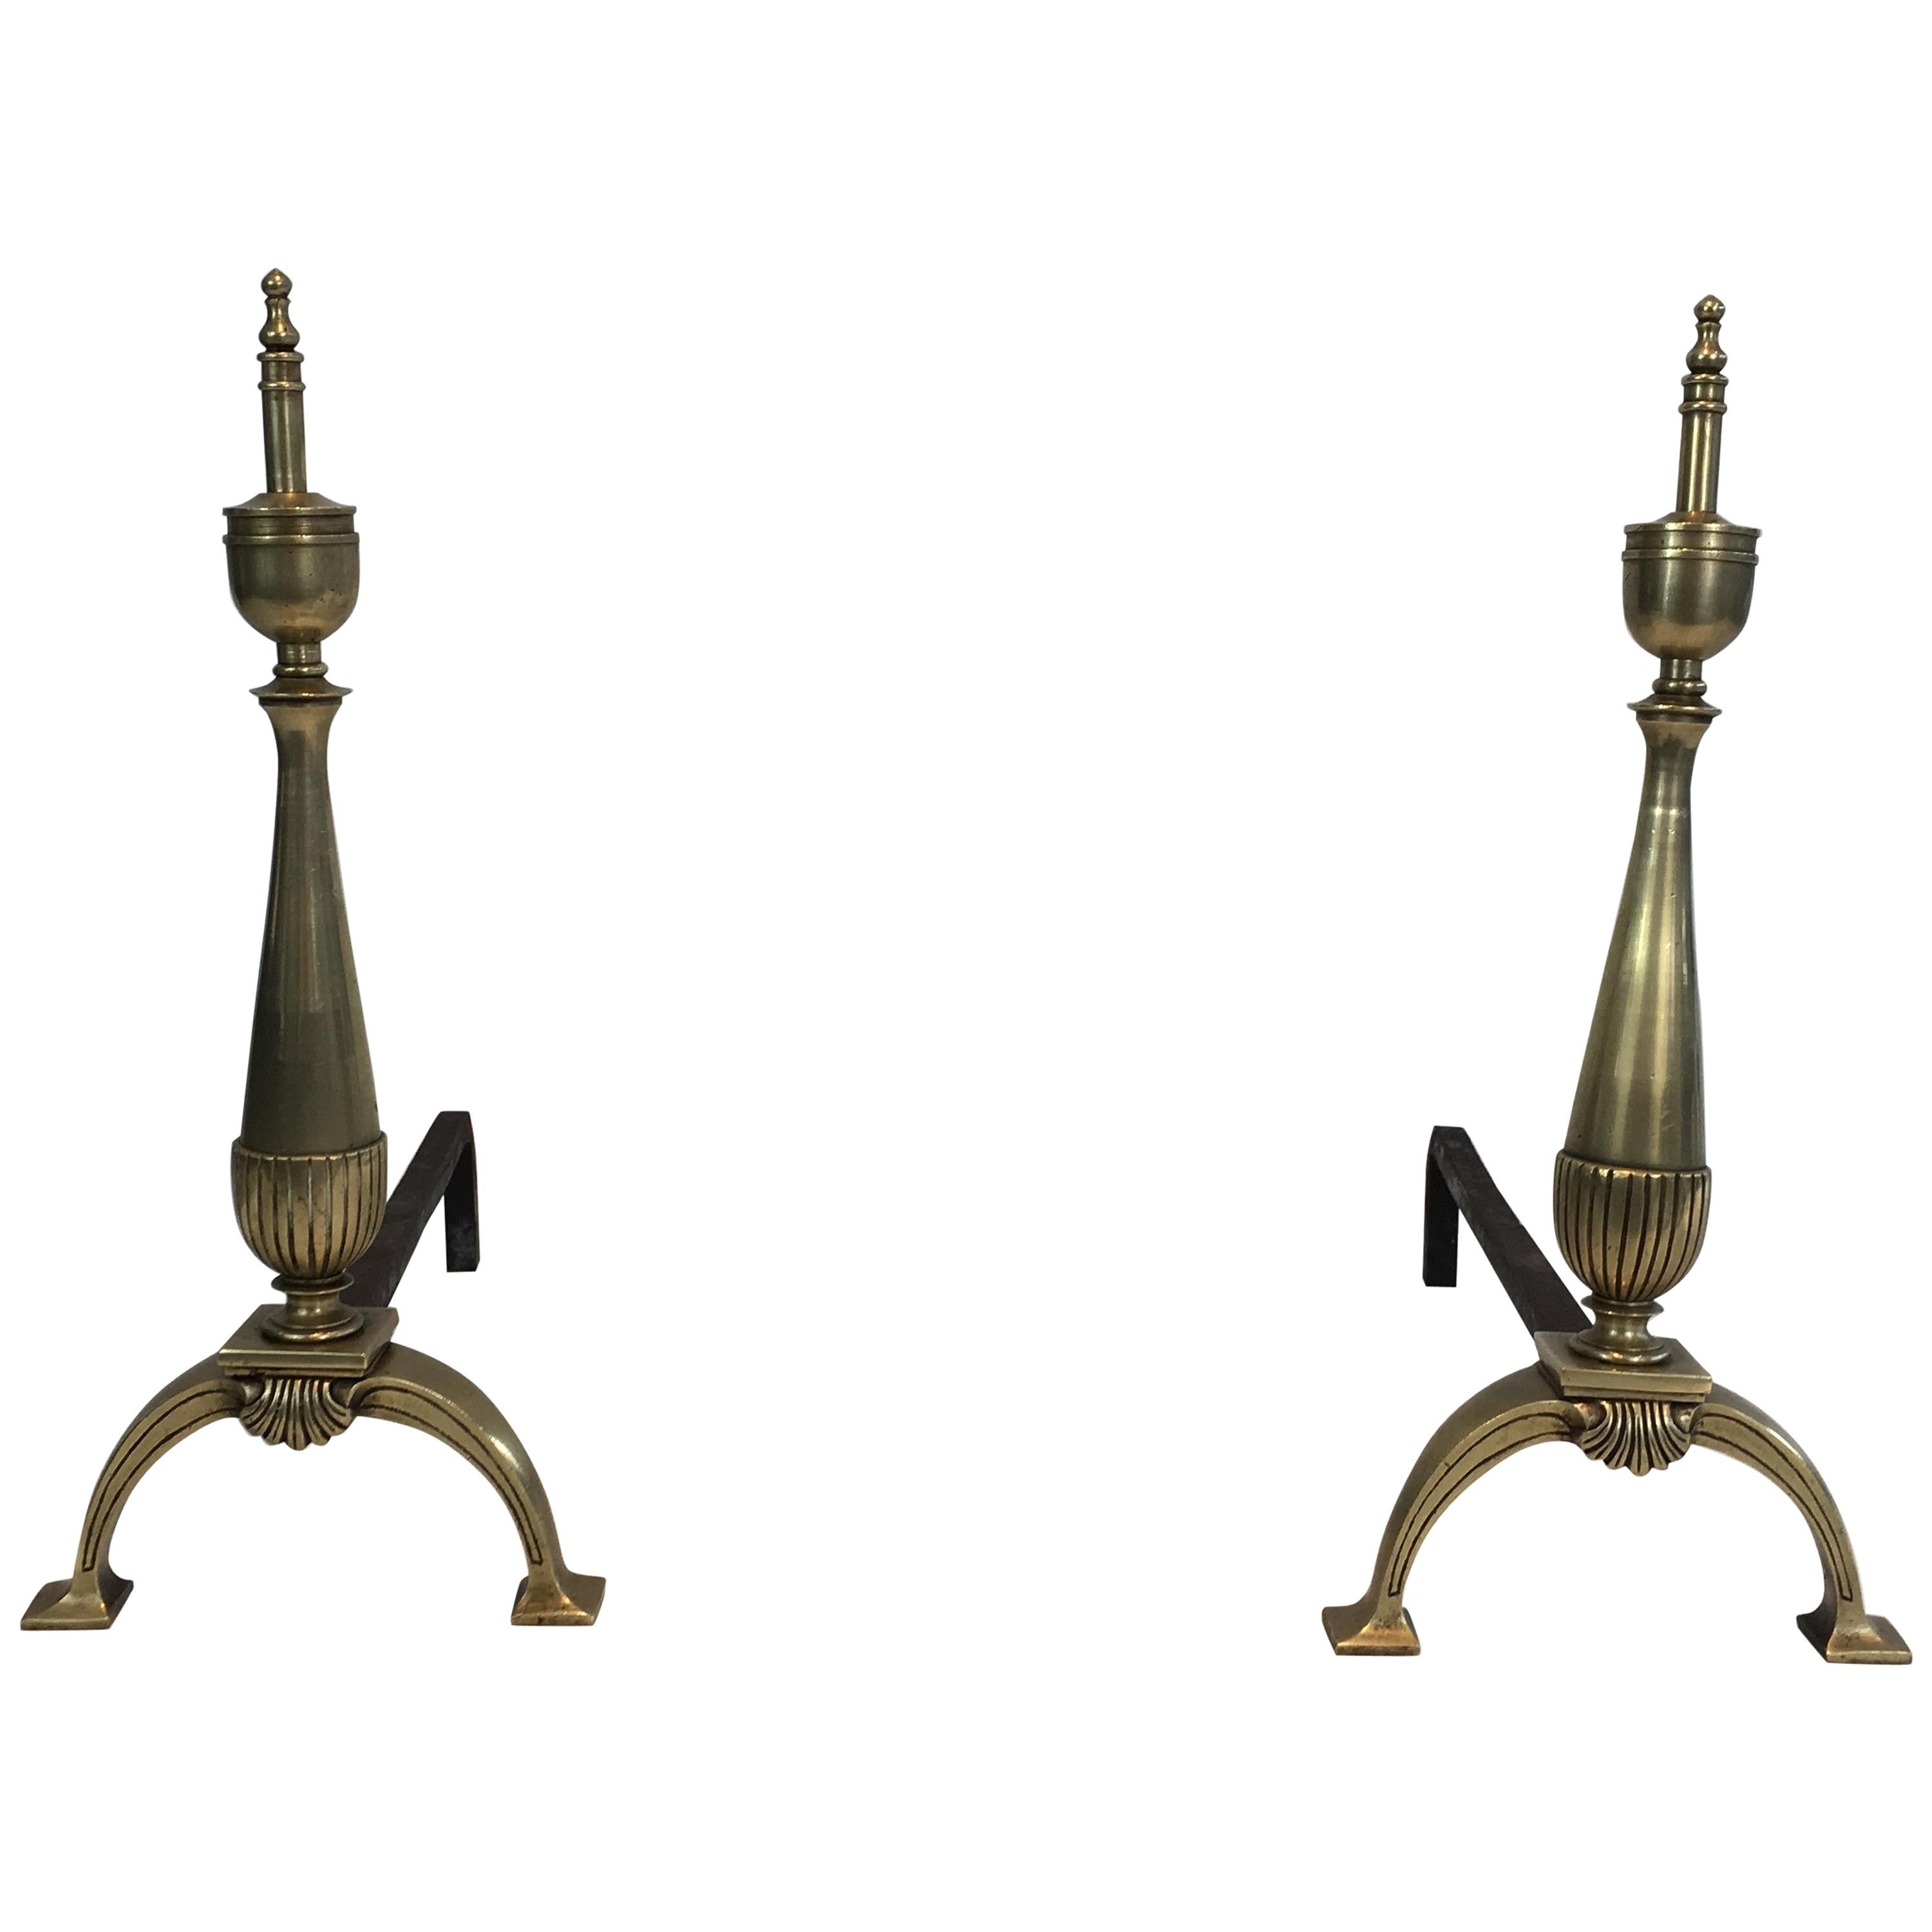 Pair of Neoclassical Brass and Wrought Iron Andirons, French, circa 1940